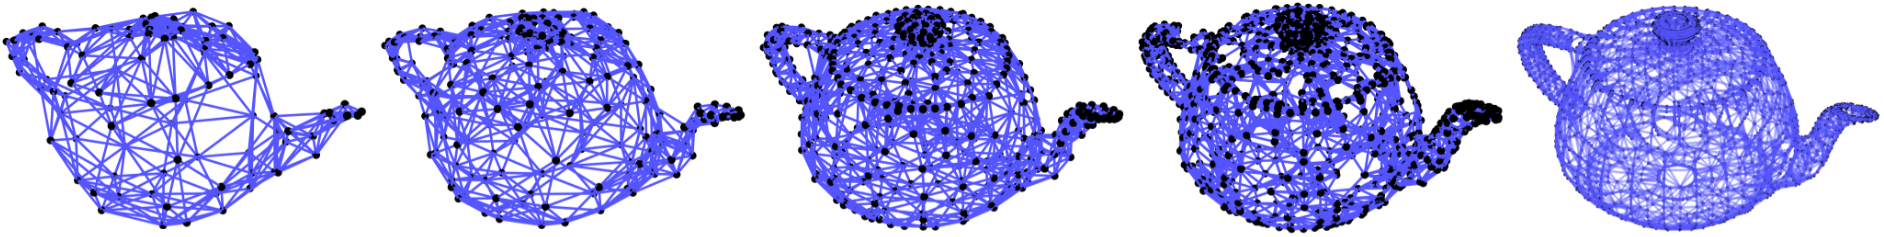 Top: subsamples of a mesh of the Utah teapot, of increasing density (each node is connected to its 8 nearest neighbors by the \Delta l =\pm 0 edges, rendered in blue). These samples form a graph lineage (\Delta l =\pm 1 edges are not illustrated). Bottom: the same set of nodes, with only \Delta l =\pm 1 edges plotted (in orange) for one node from the coarsest level and its descendants.